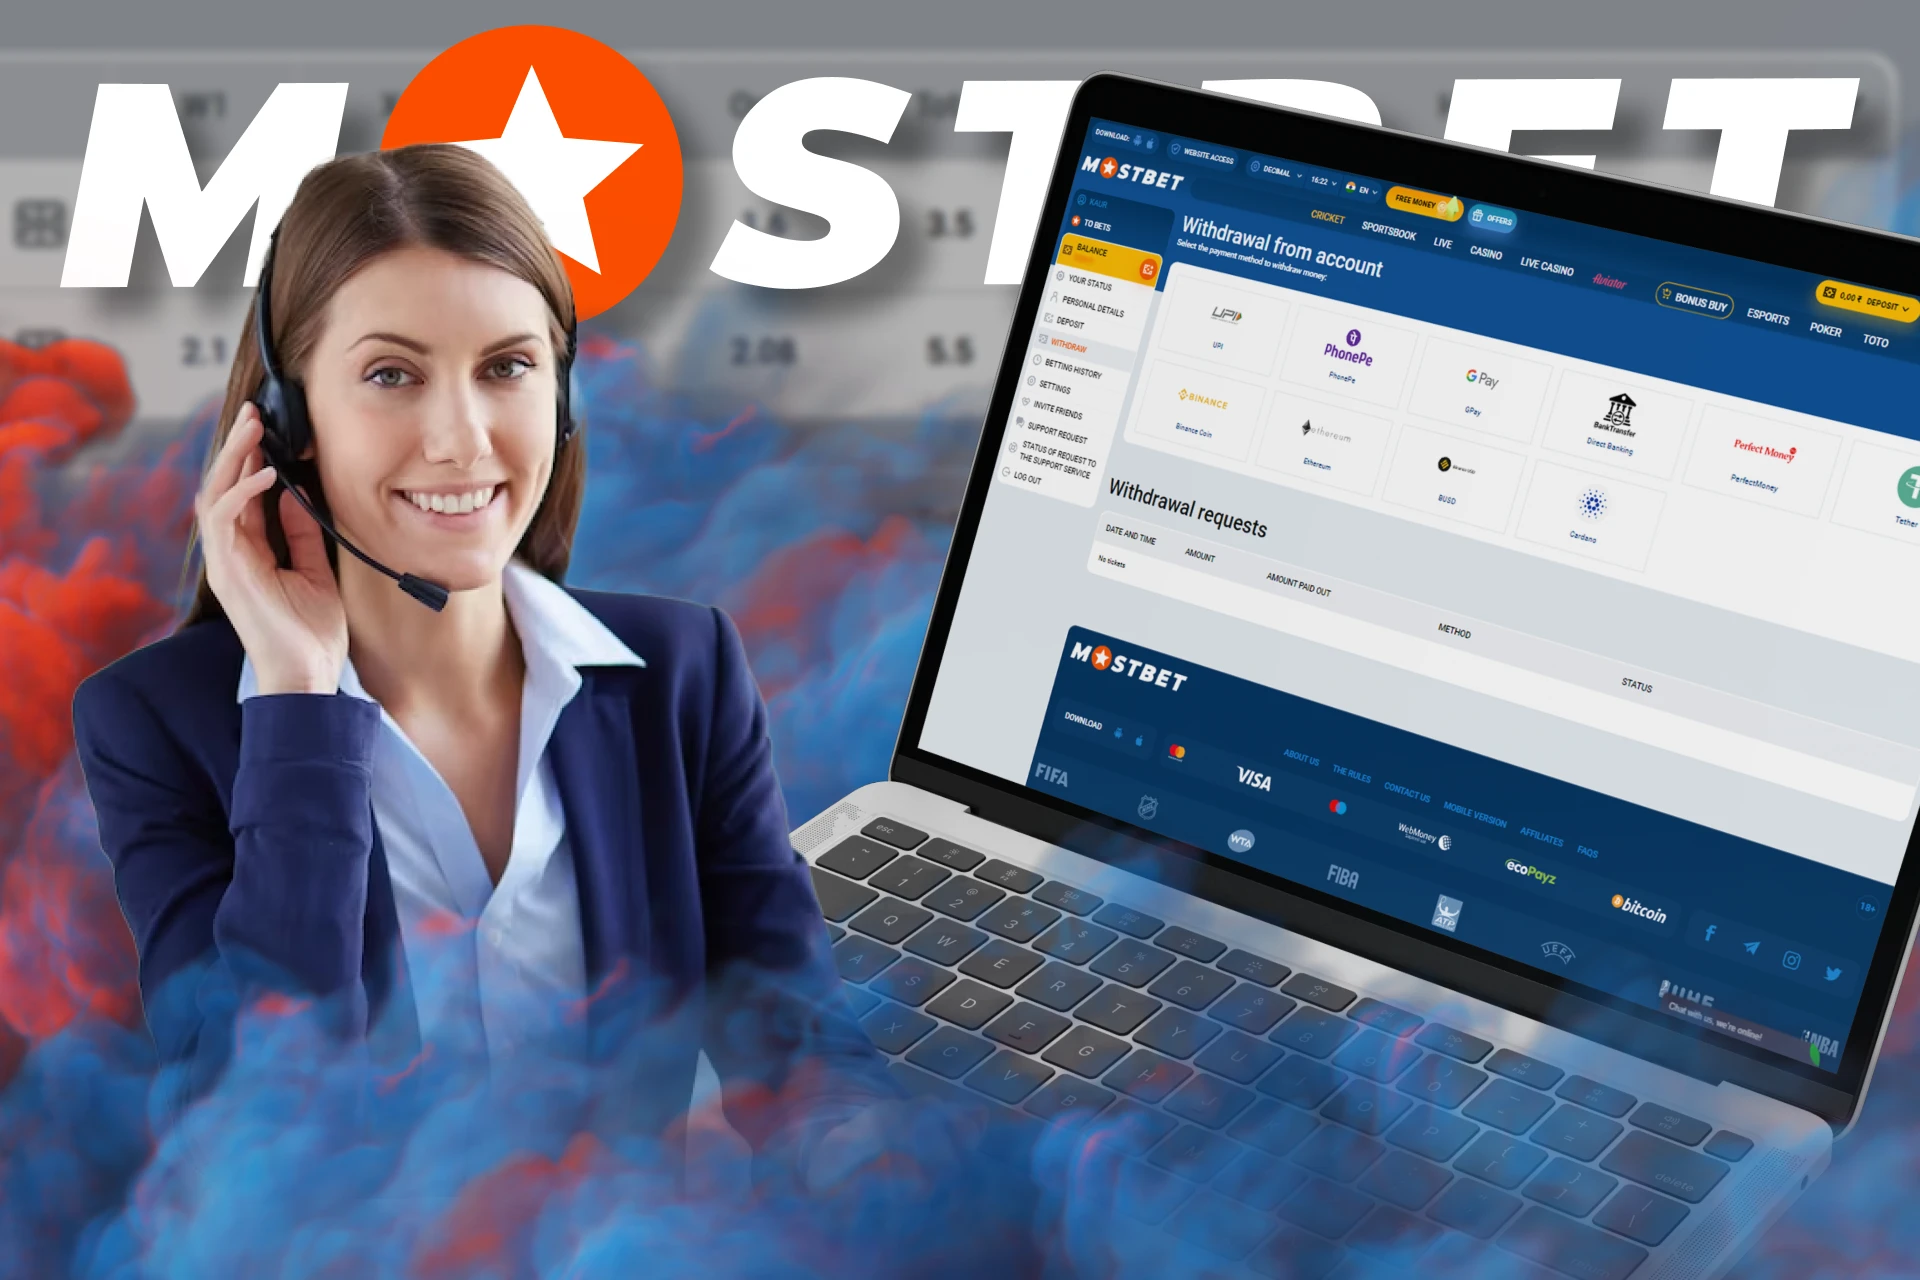 If you have problems with payments, contact Mostbet support.